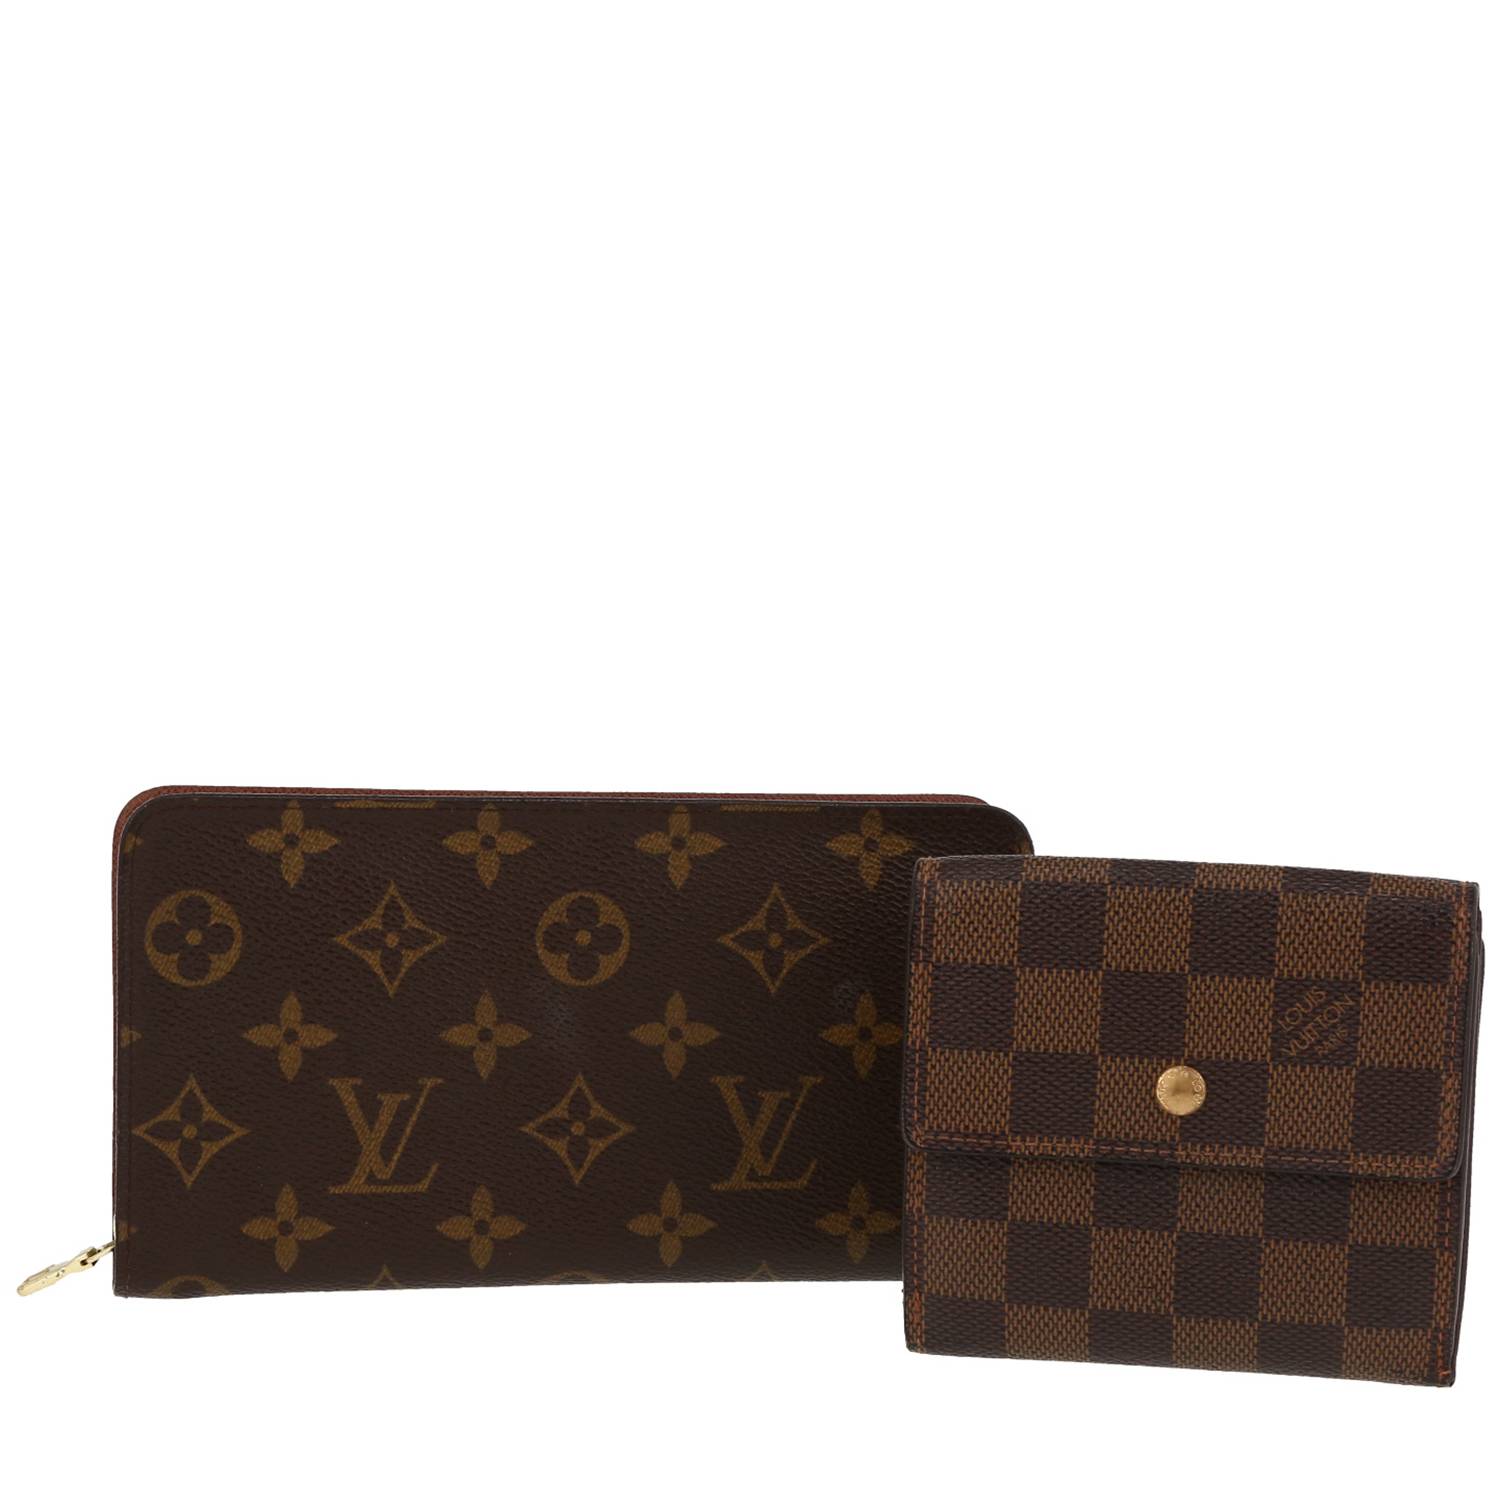 Charming Louis Vuitton wallet in monogram canvas and brown leather